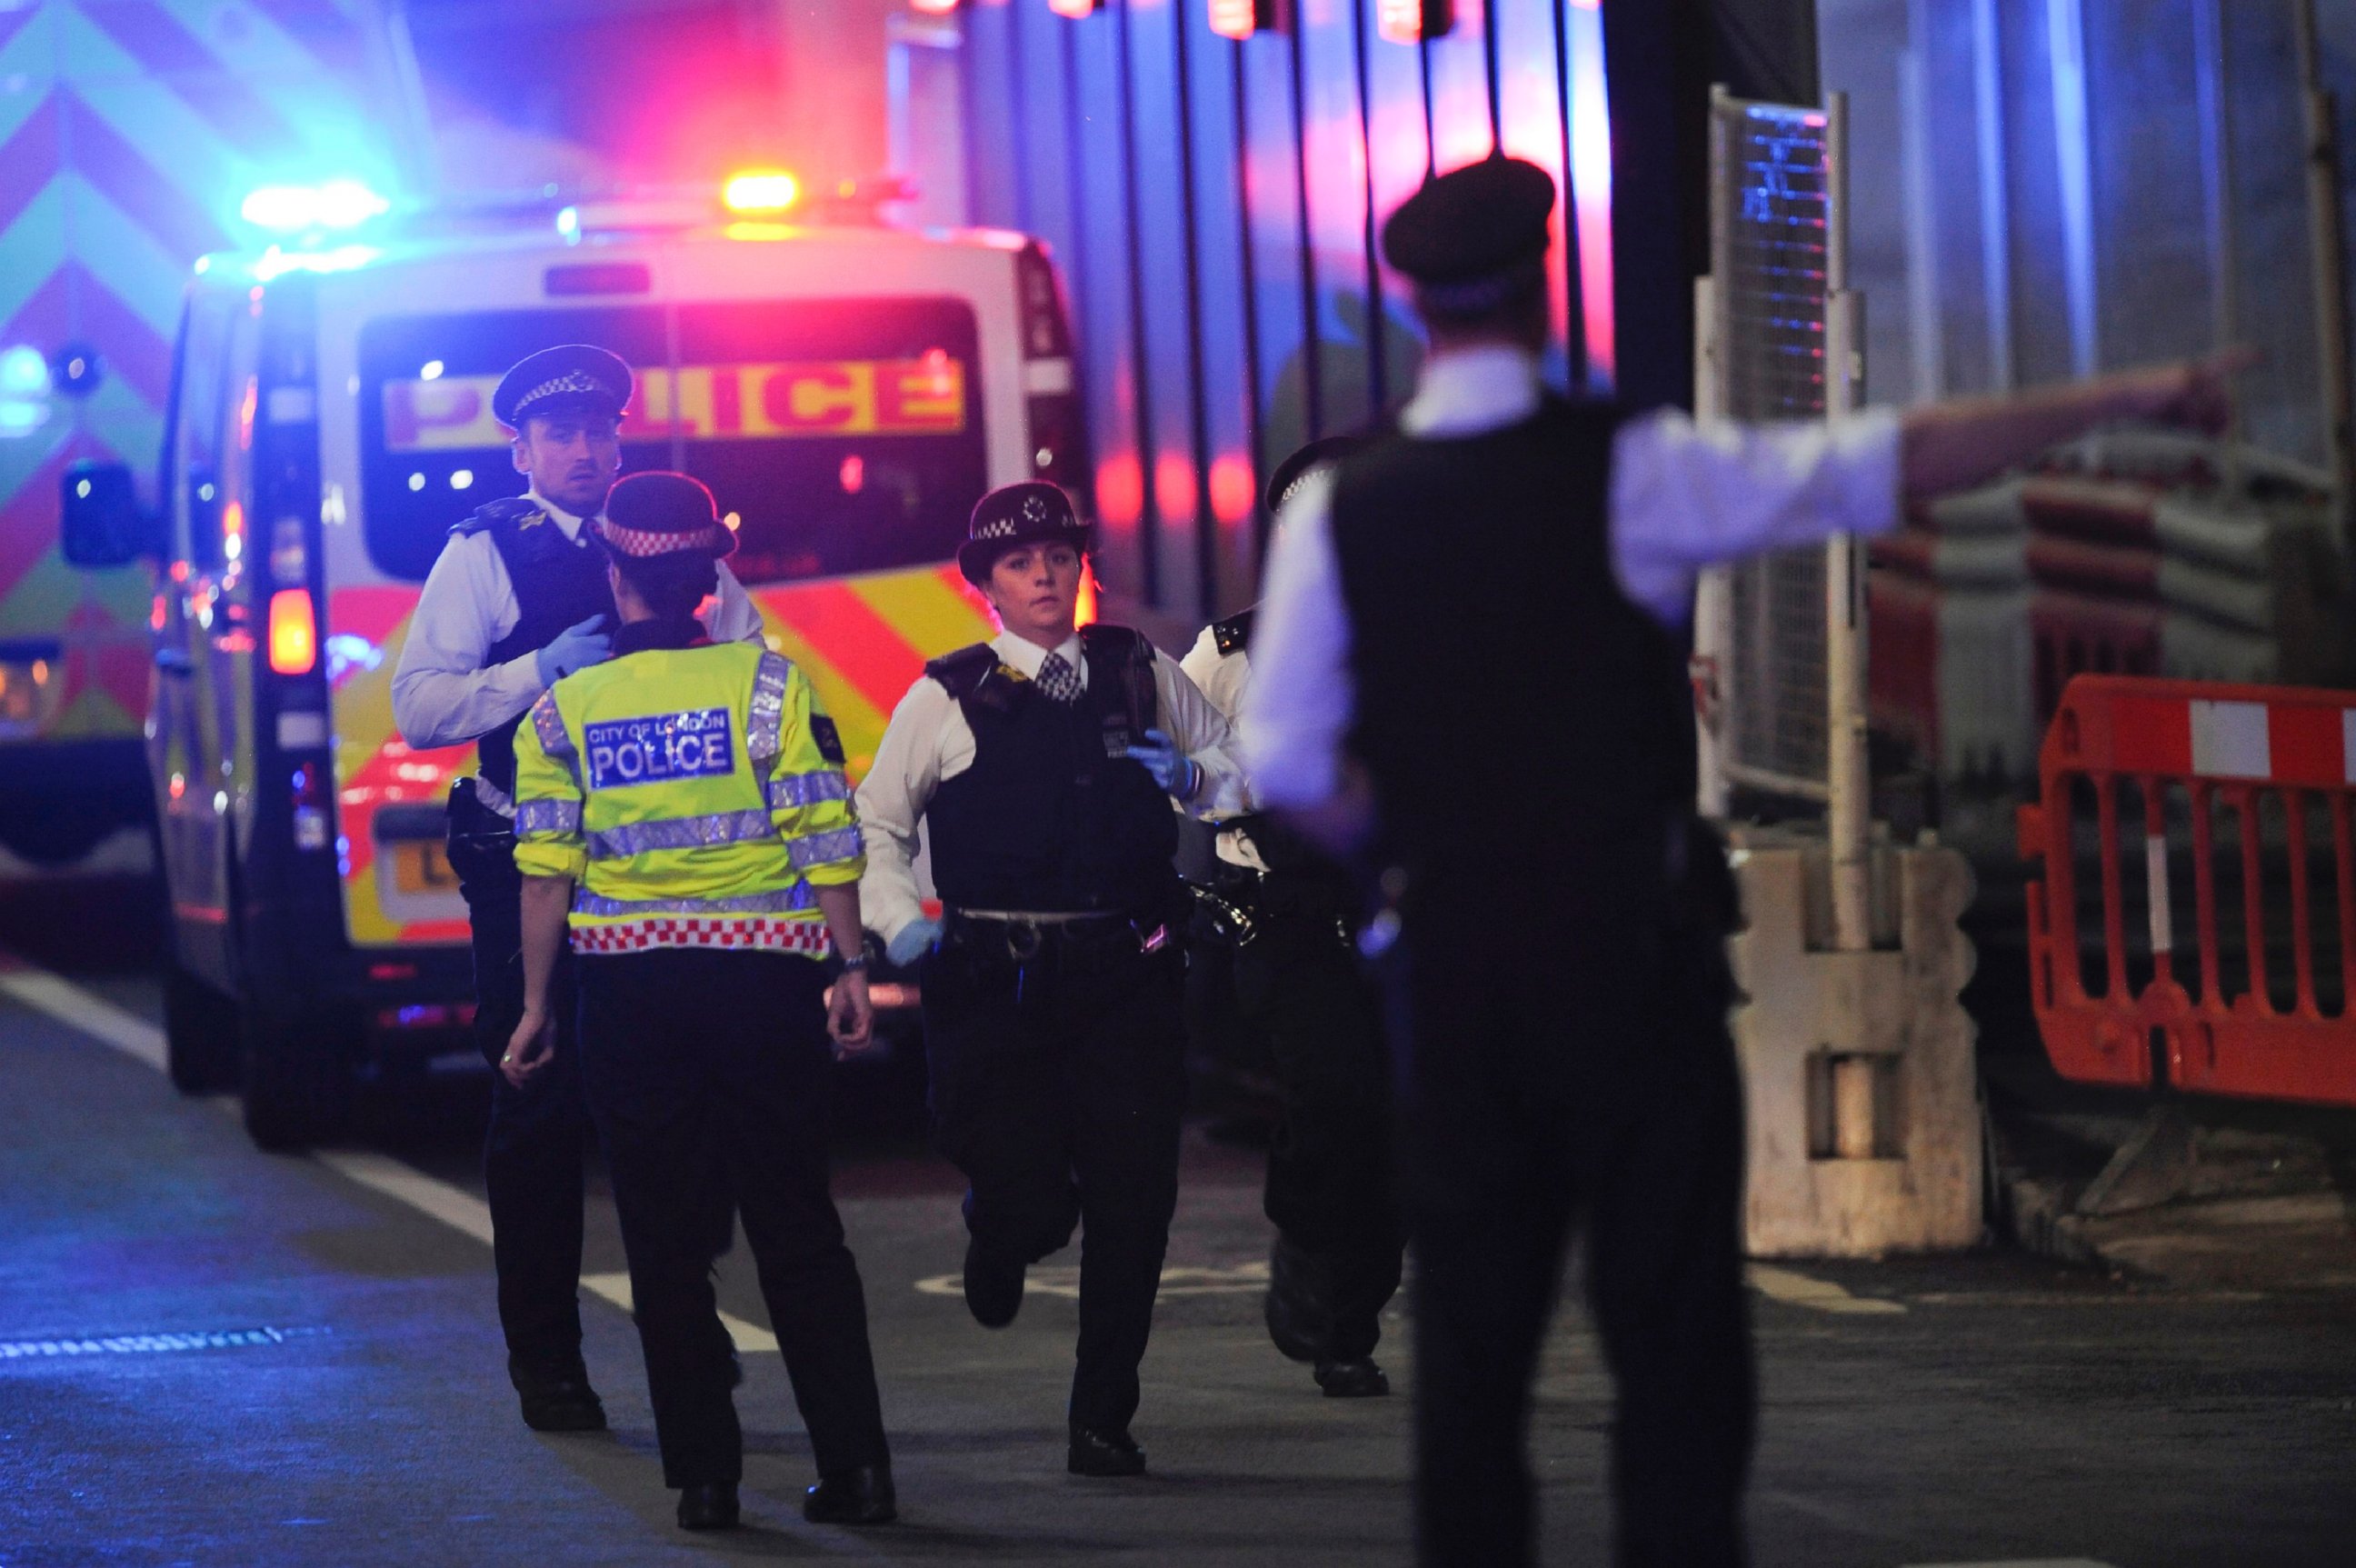 ISIS claims responsibility for London Bridge attack